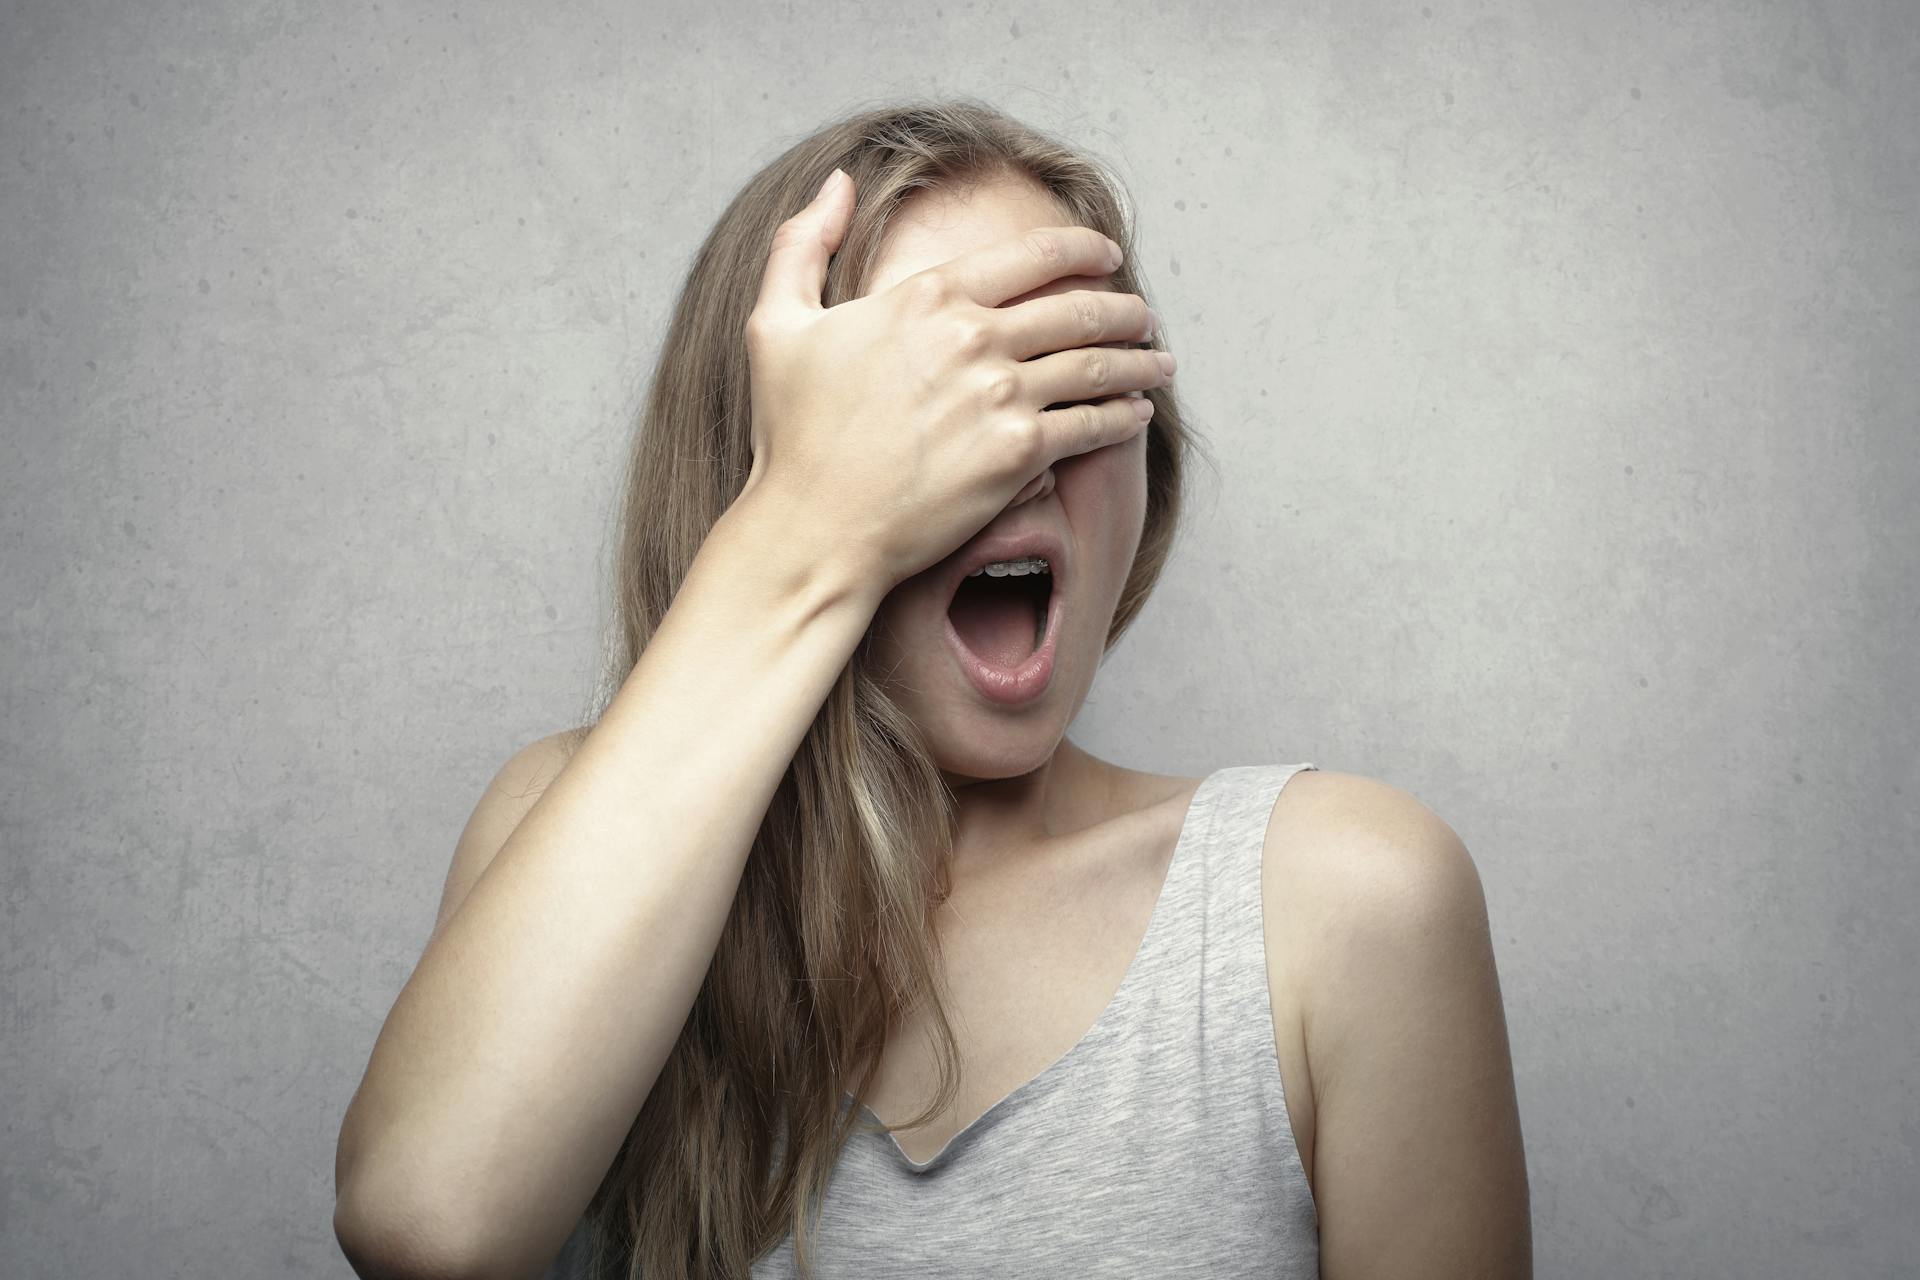 A shocked woman covering her eyes | Source: Pexels